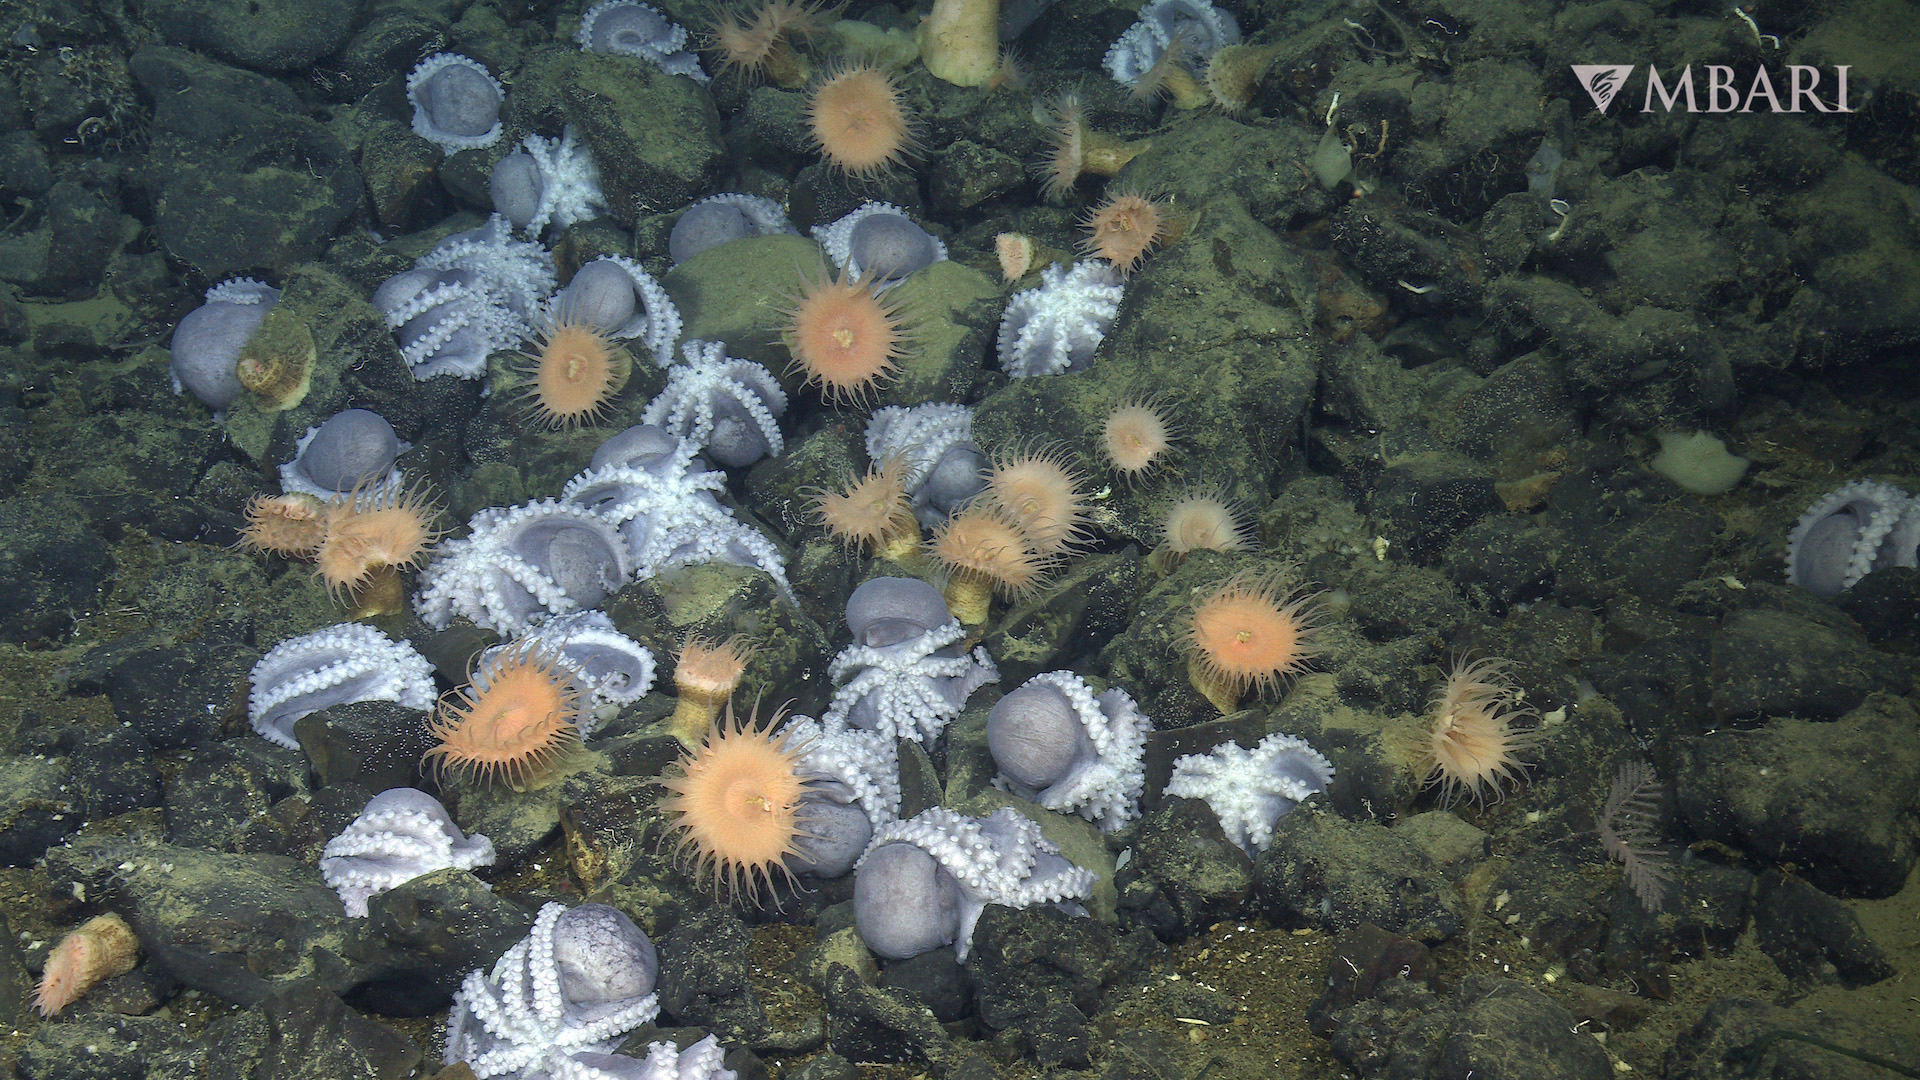 An aggregation of female pearl octopus (Muusoctopus robustus) nesting at the Octopus Garden, located near Davidson Seamount off the Central California at a depth of approximately 3,200 meters.